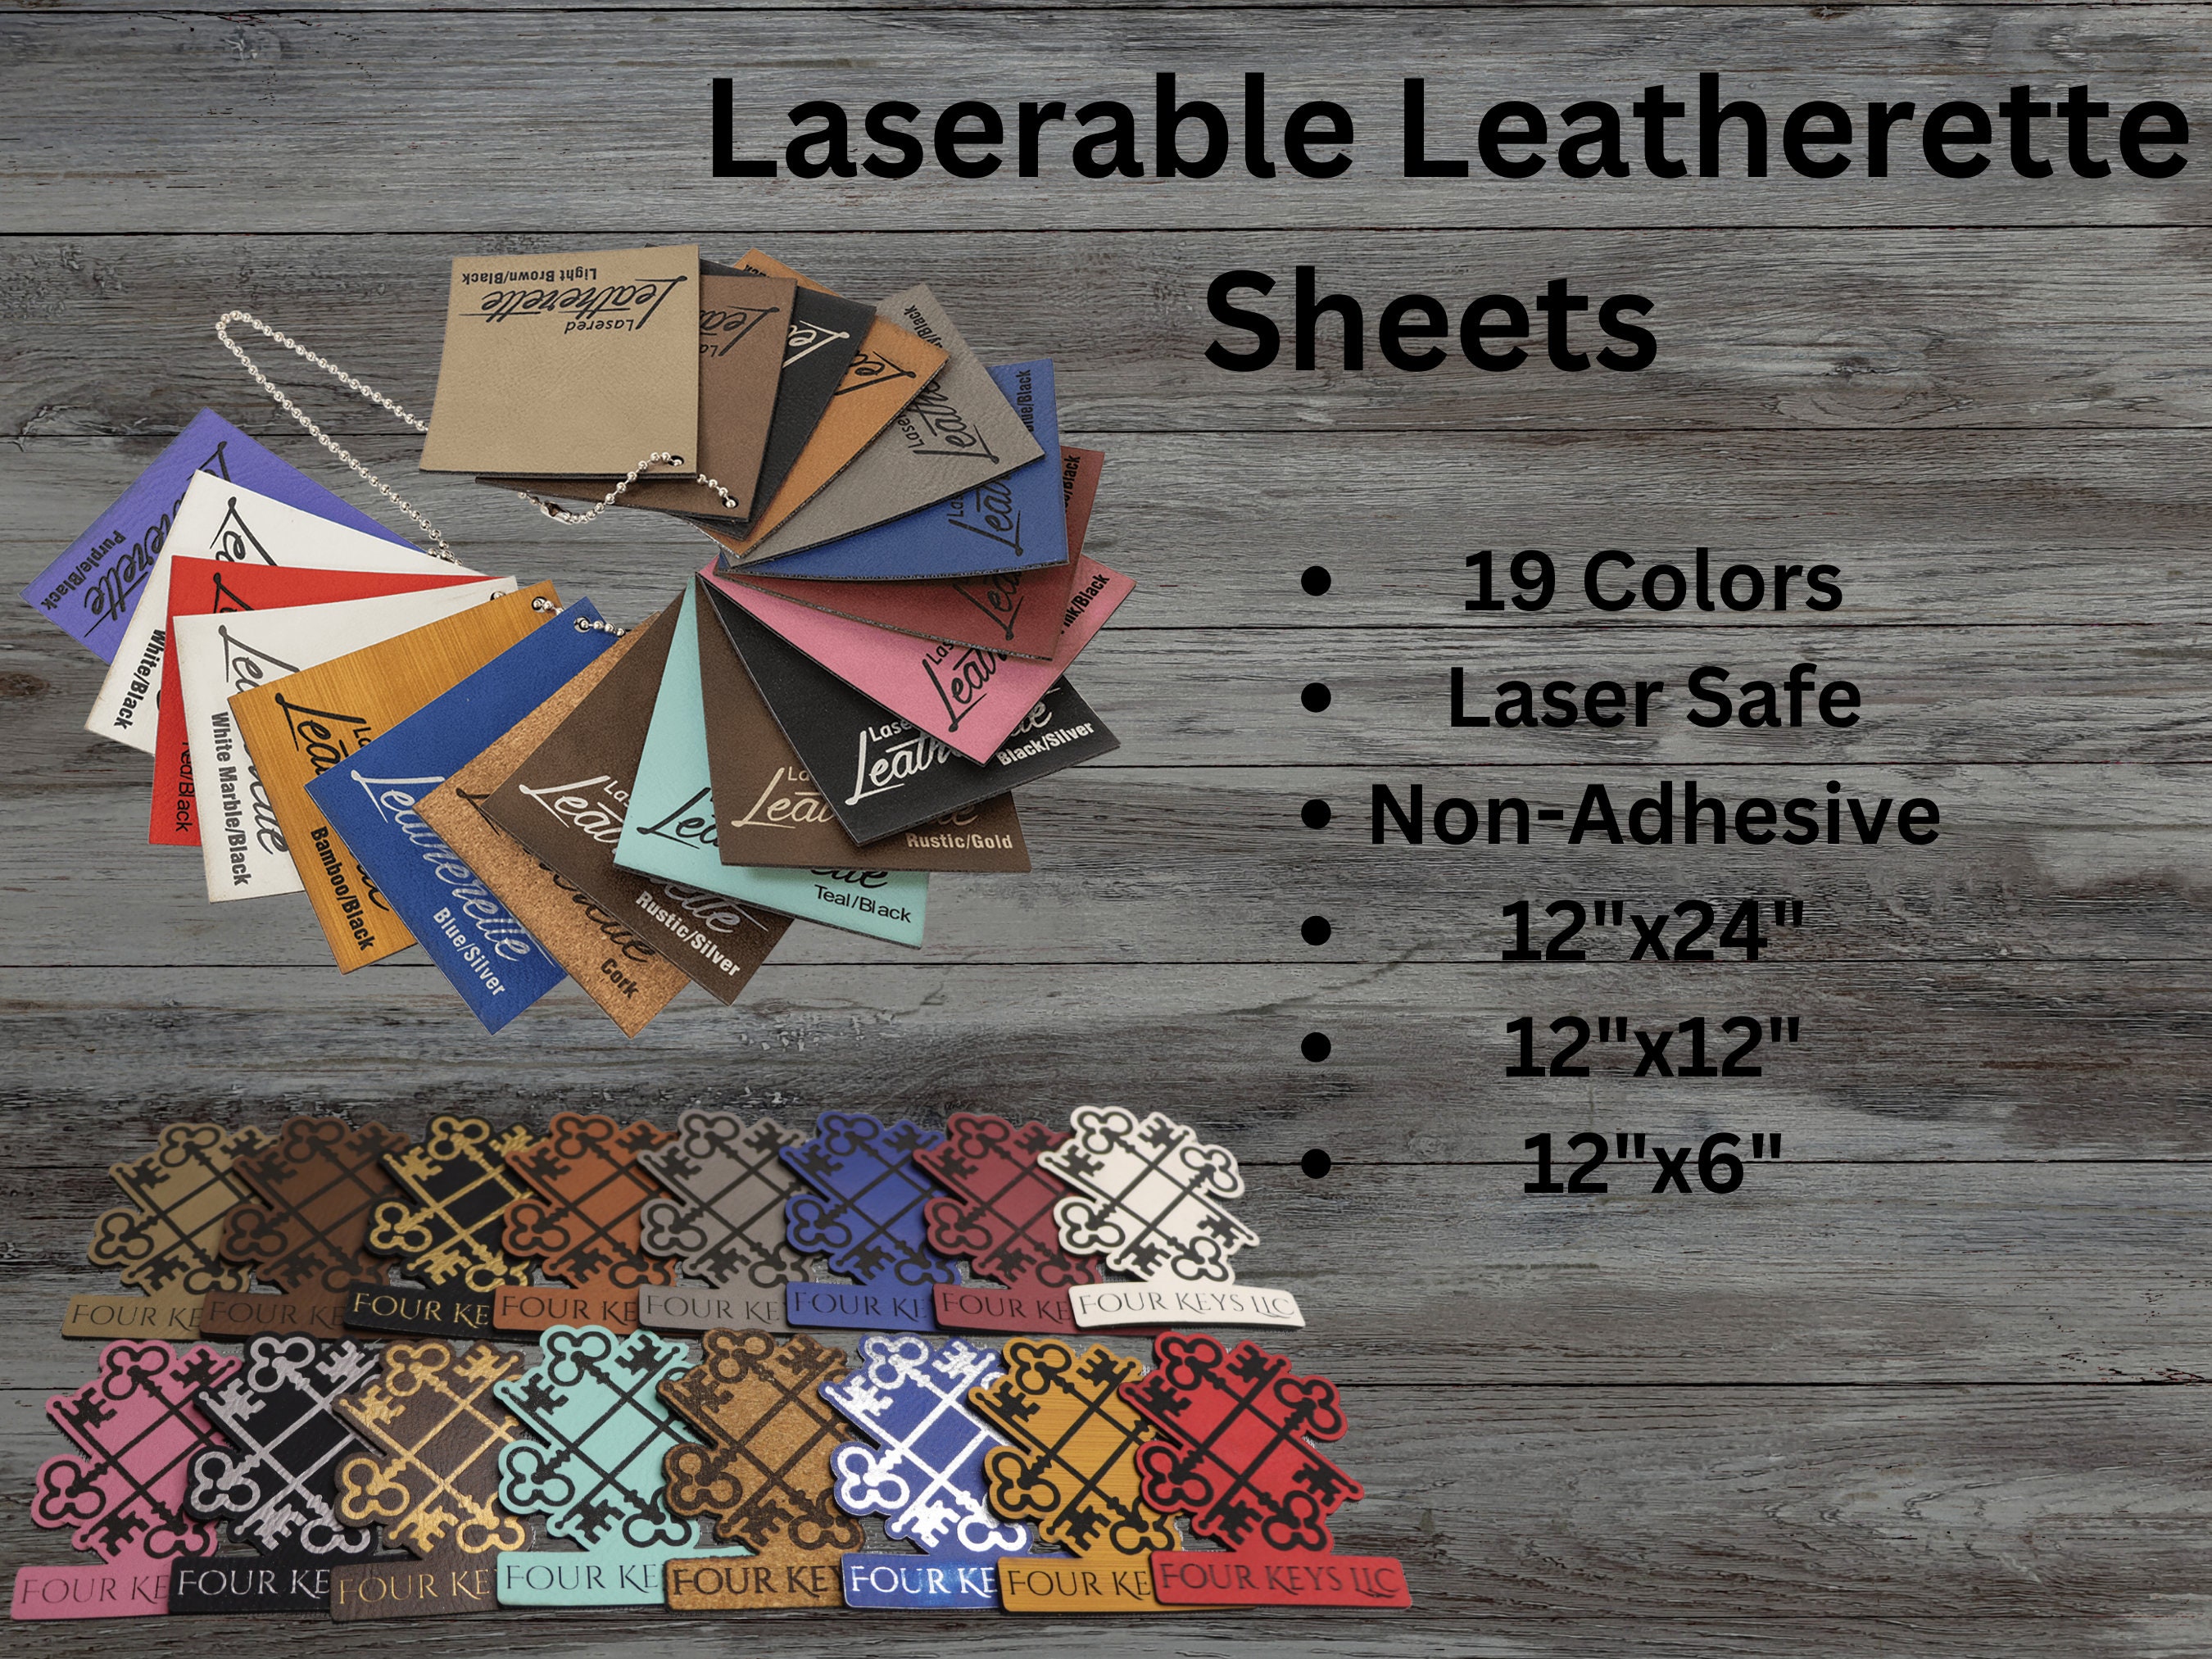 Leatherette Sheets Supplier, Texture And Hues